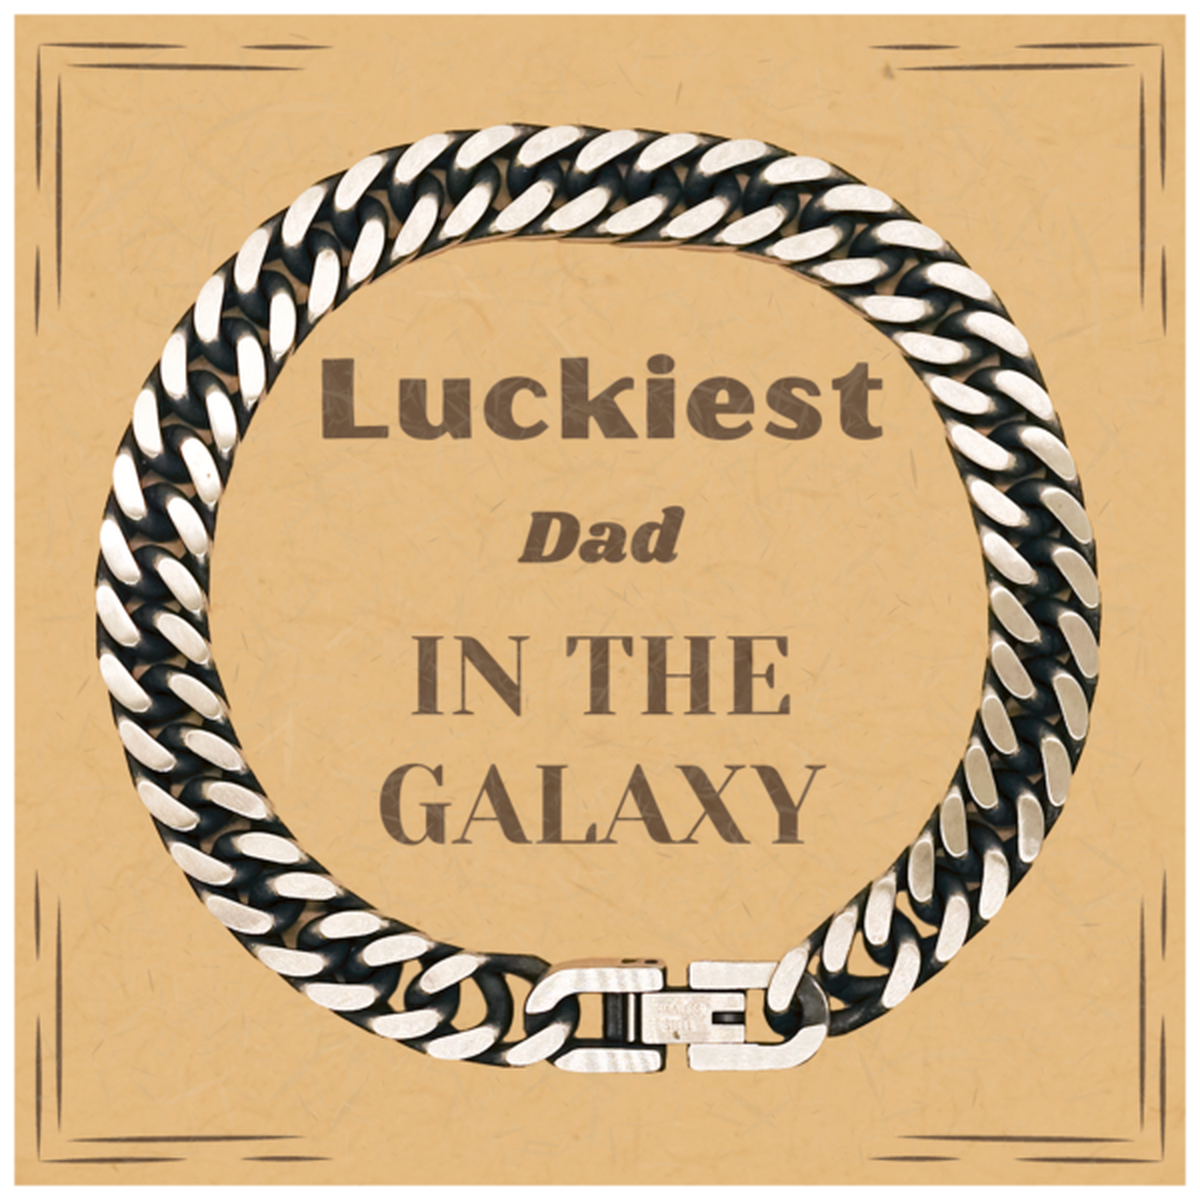 Luckiest Dad in the Galaxy, To My Dad Message Card Gifts, Christmas Dad Cuban Link Chain Bracelet Gifts, X-mas Birthday Unique Gifts For Dad Men Women